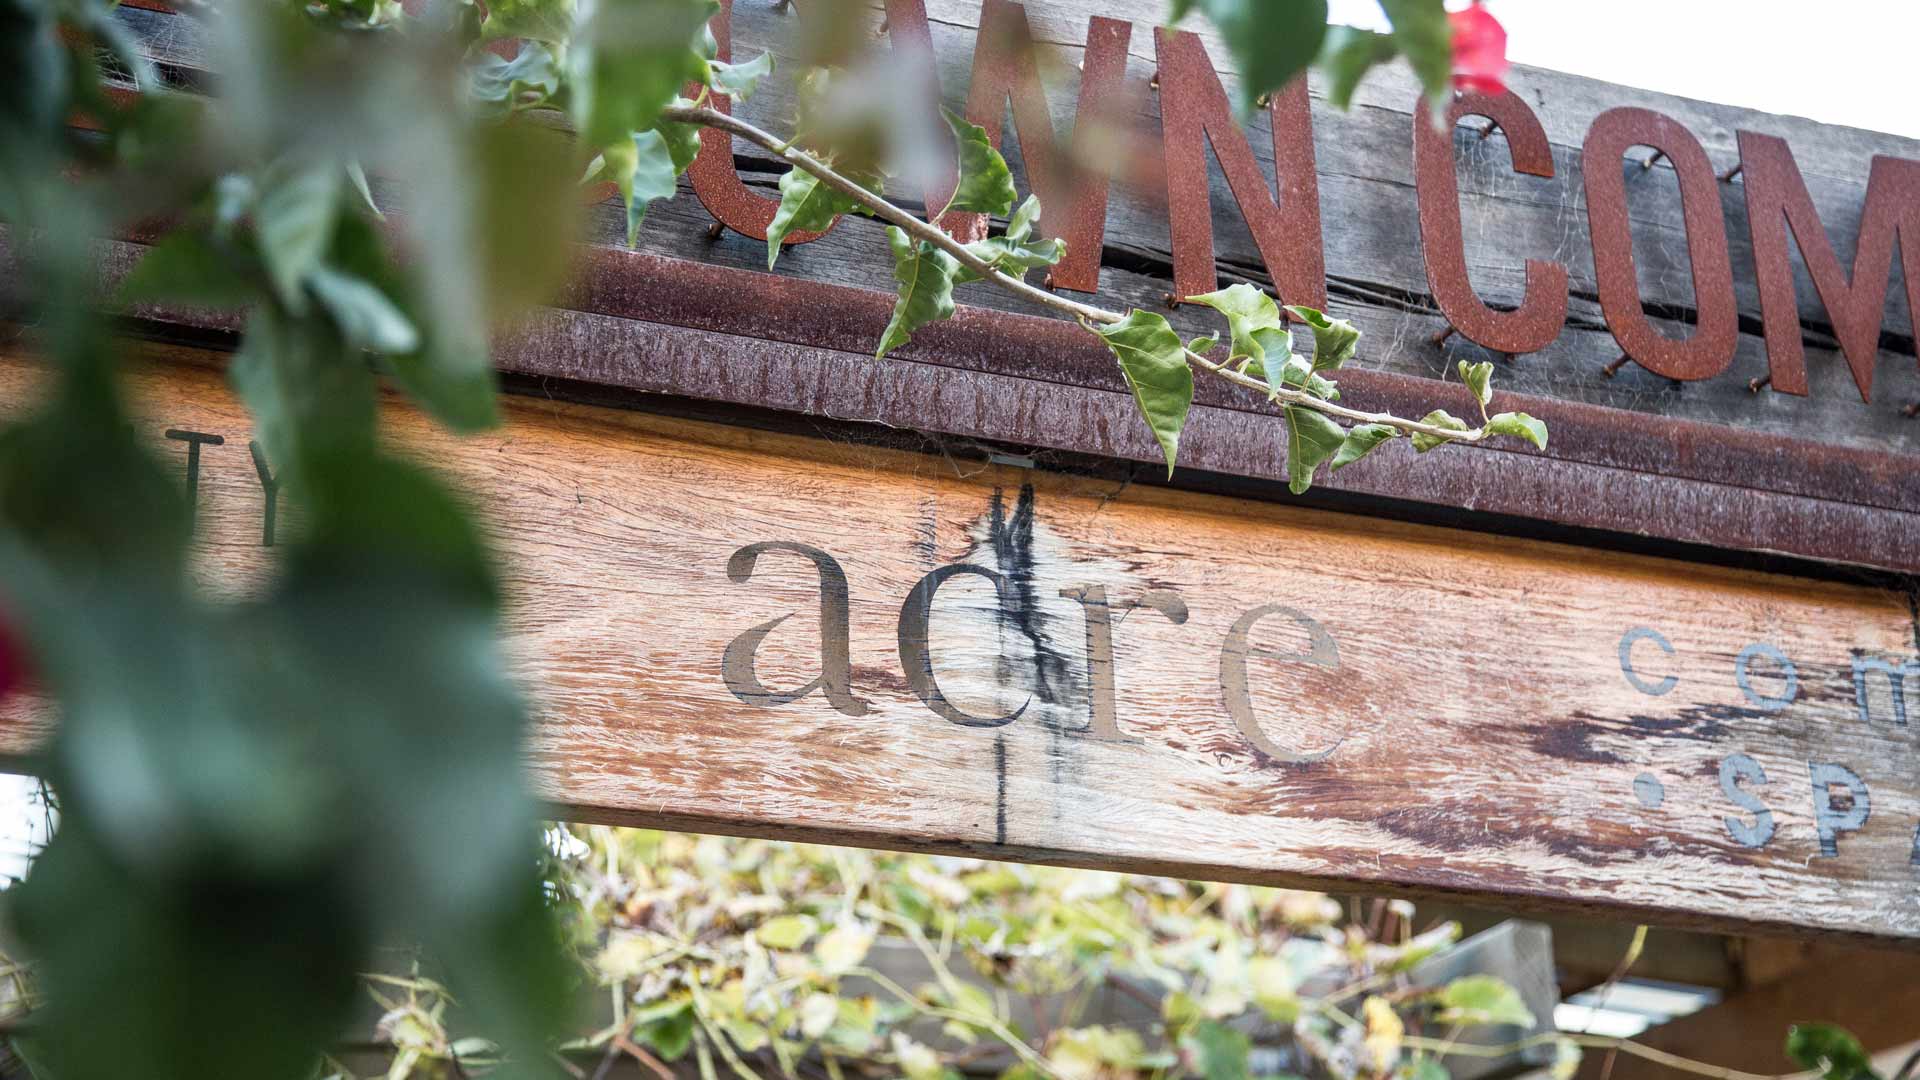 Acre Eatery's Italian Takeover